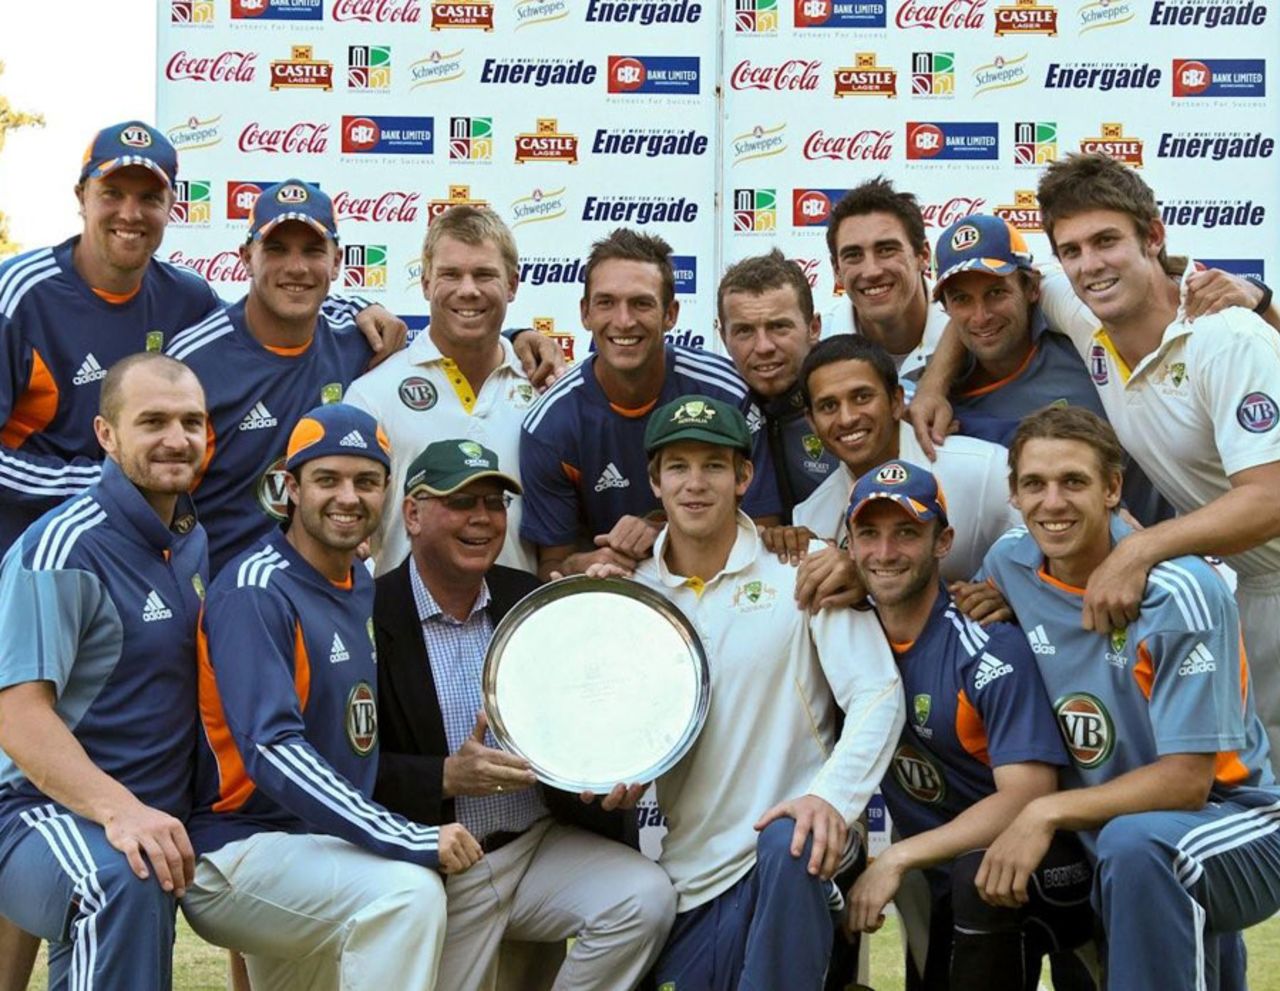 Australia A pose with the trophy after defeating Zimbabwe XI, Zimbabwe XI v Australia A, Tour Match, Harare, July 24 2011